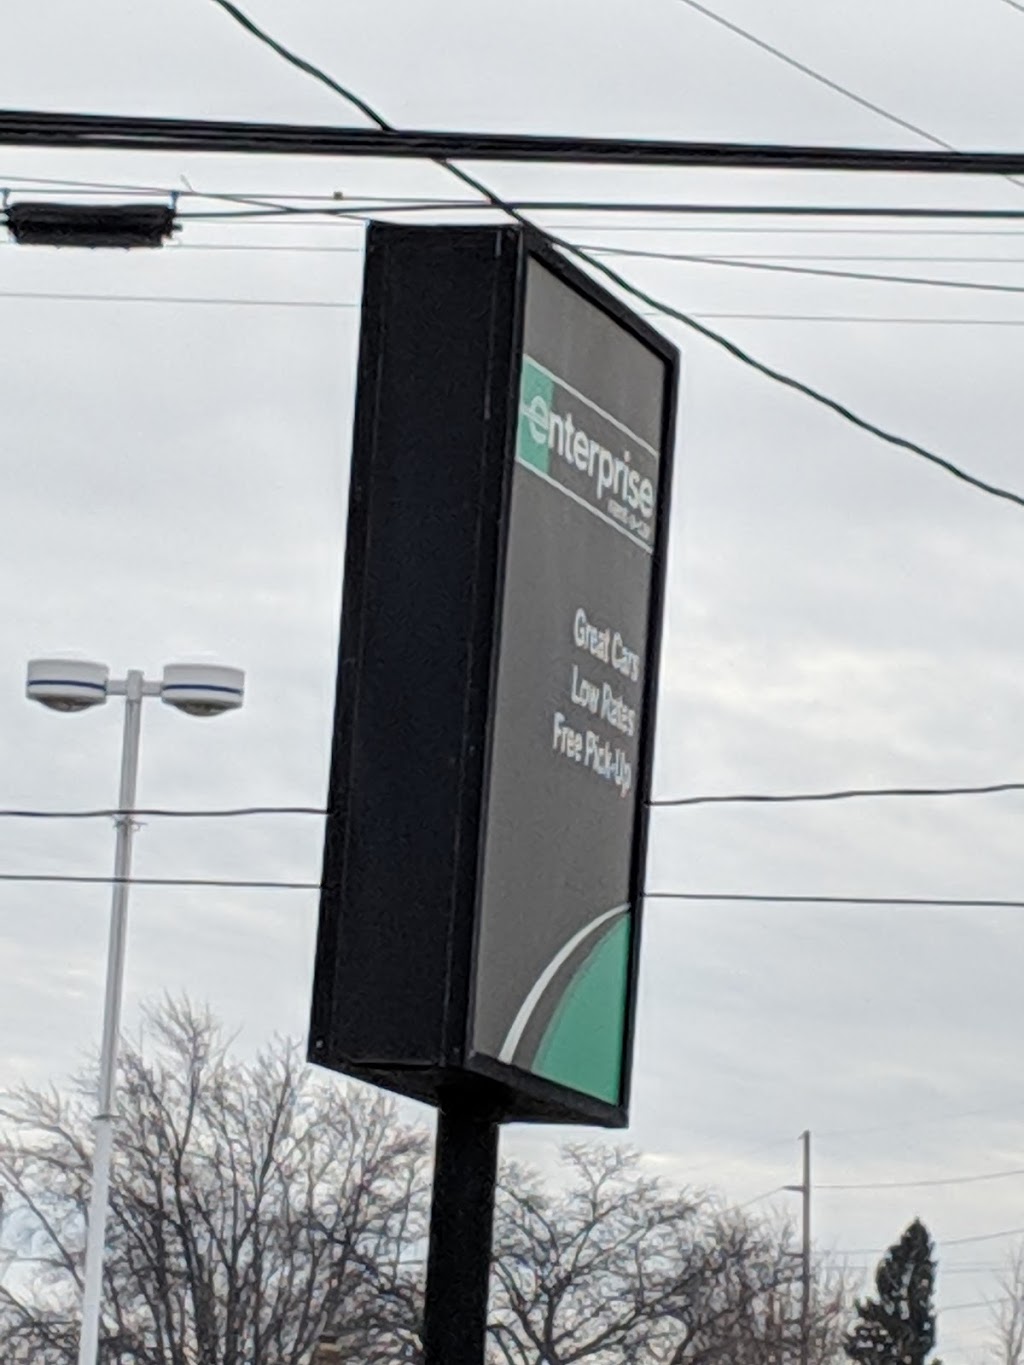 Enterprise Rent-A-Car | 2378 W State St, Fremont, OH 43420, USA | Phone: (419) 334-4700